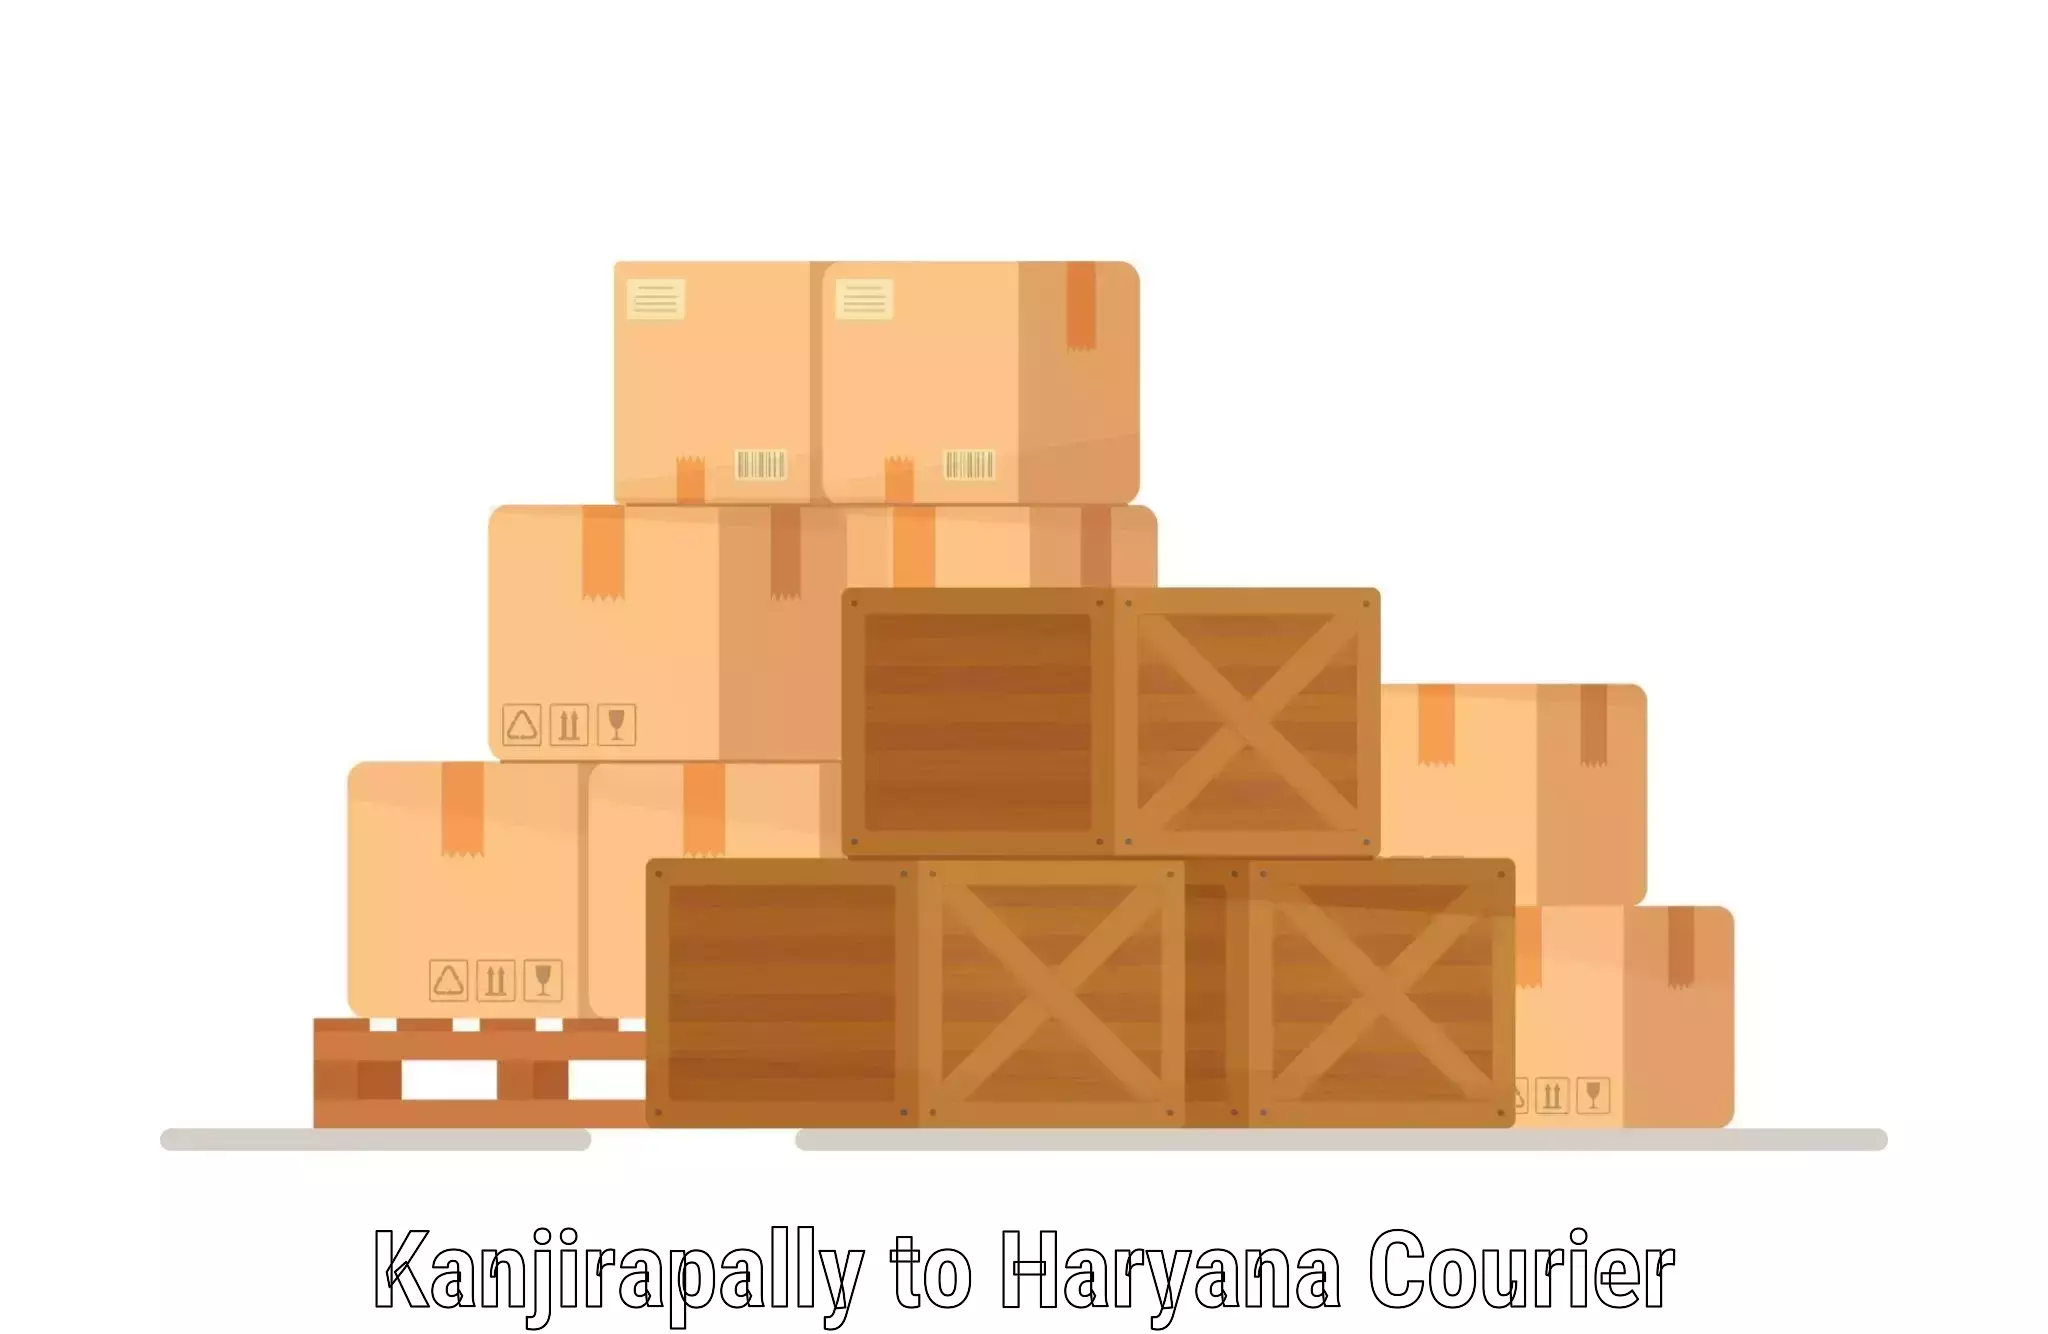 Courier service comparison Kanjirapally to Gurgaon